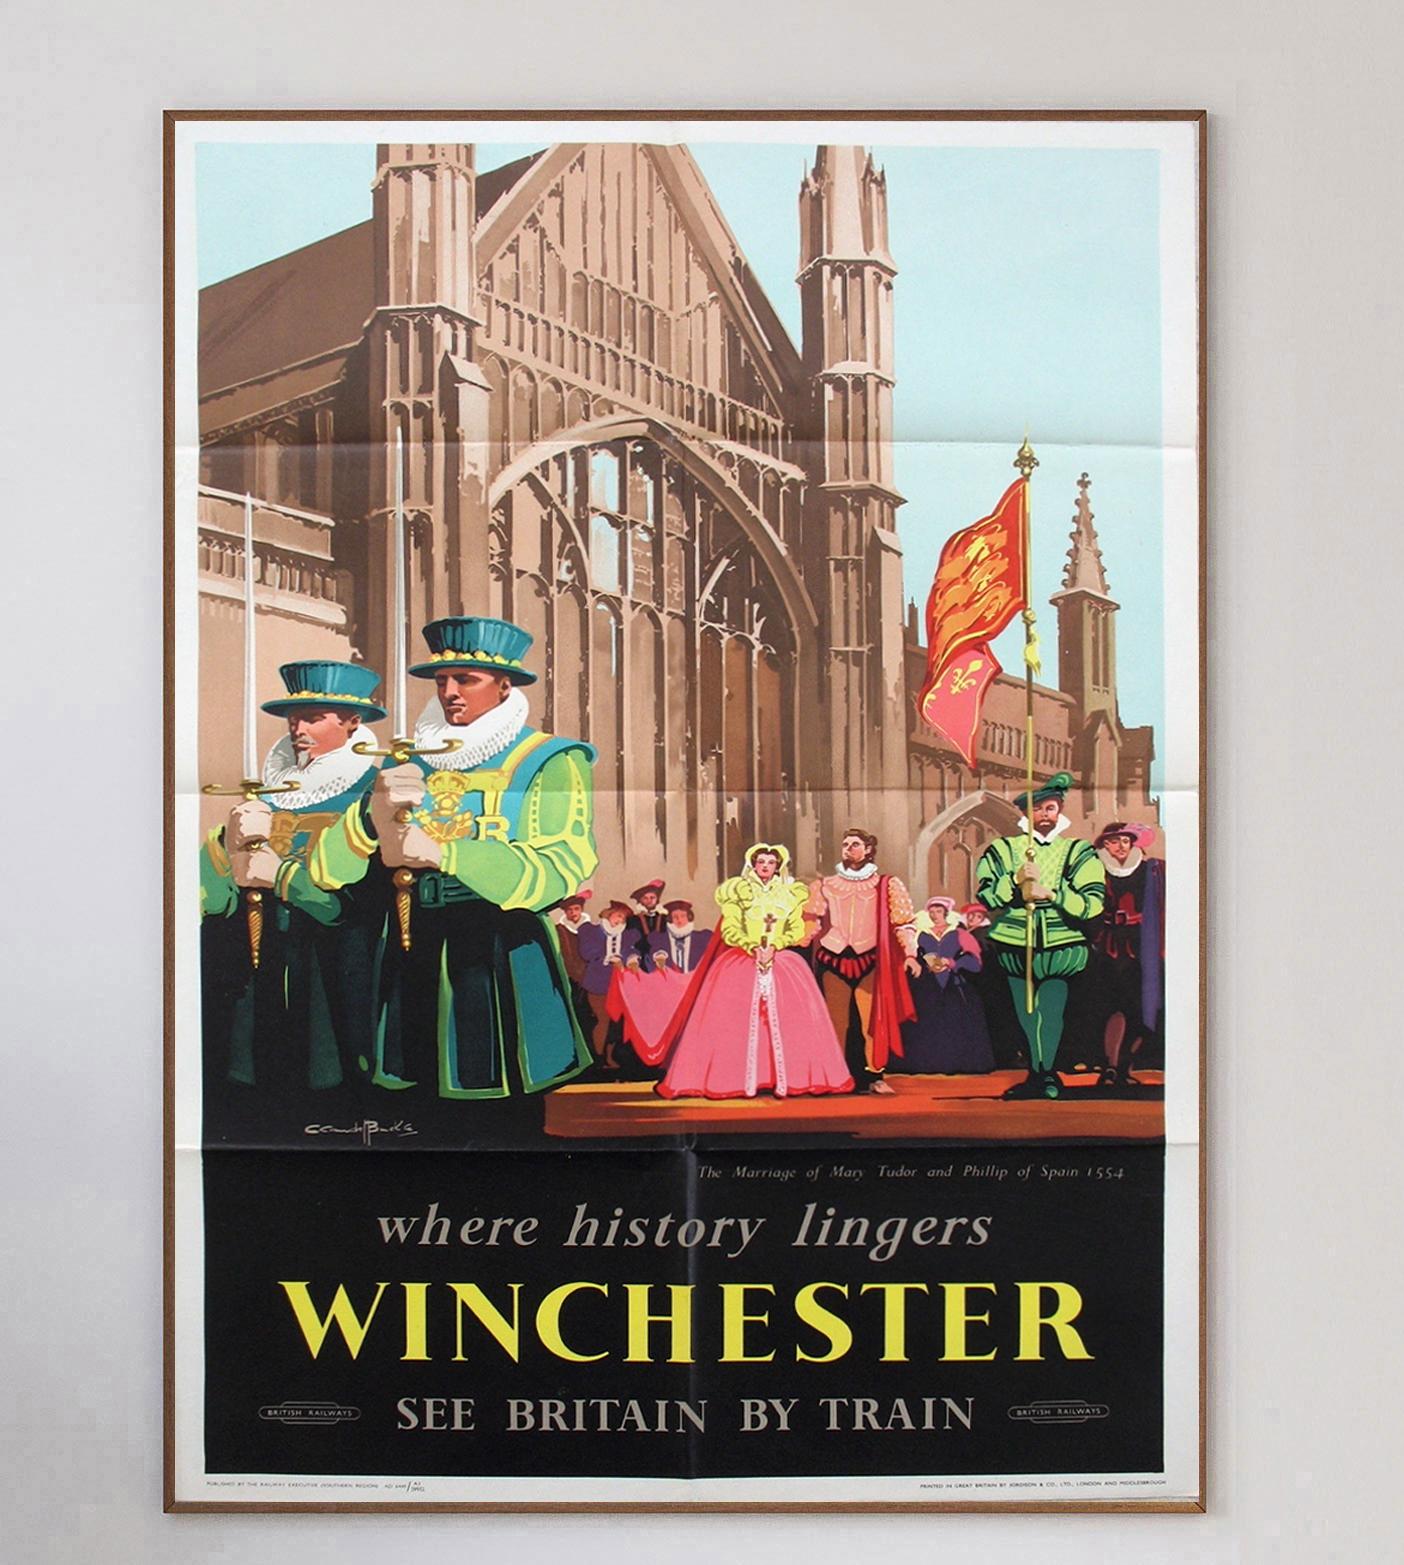 Showing the Royal Couple Mary Tudor and Phillip of Spain at their wedding in 1554, this poster created for British Railways to advertise Winchester was part of a small series by the company with artwork from Claude Henry Buckle to promote the